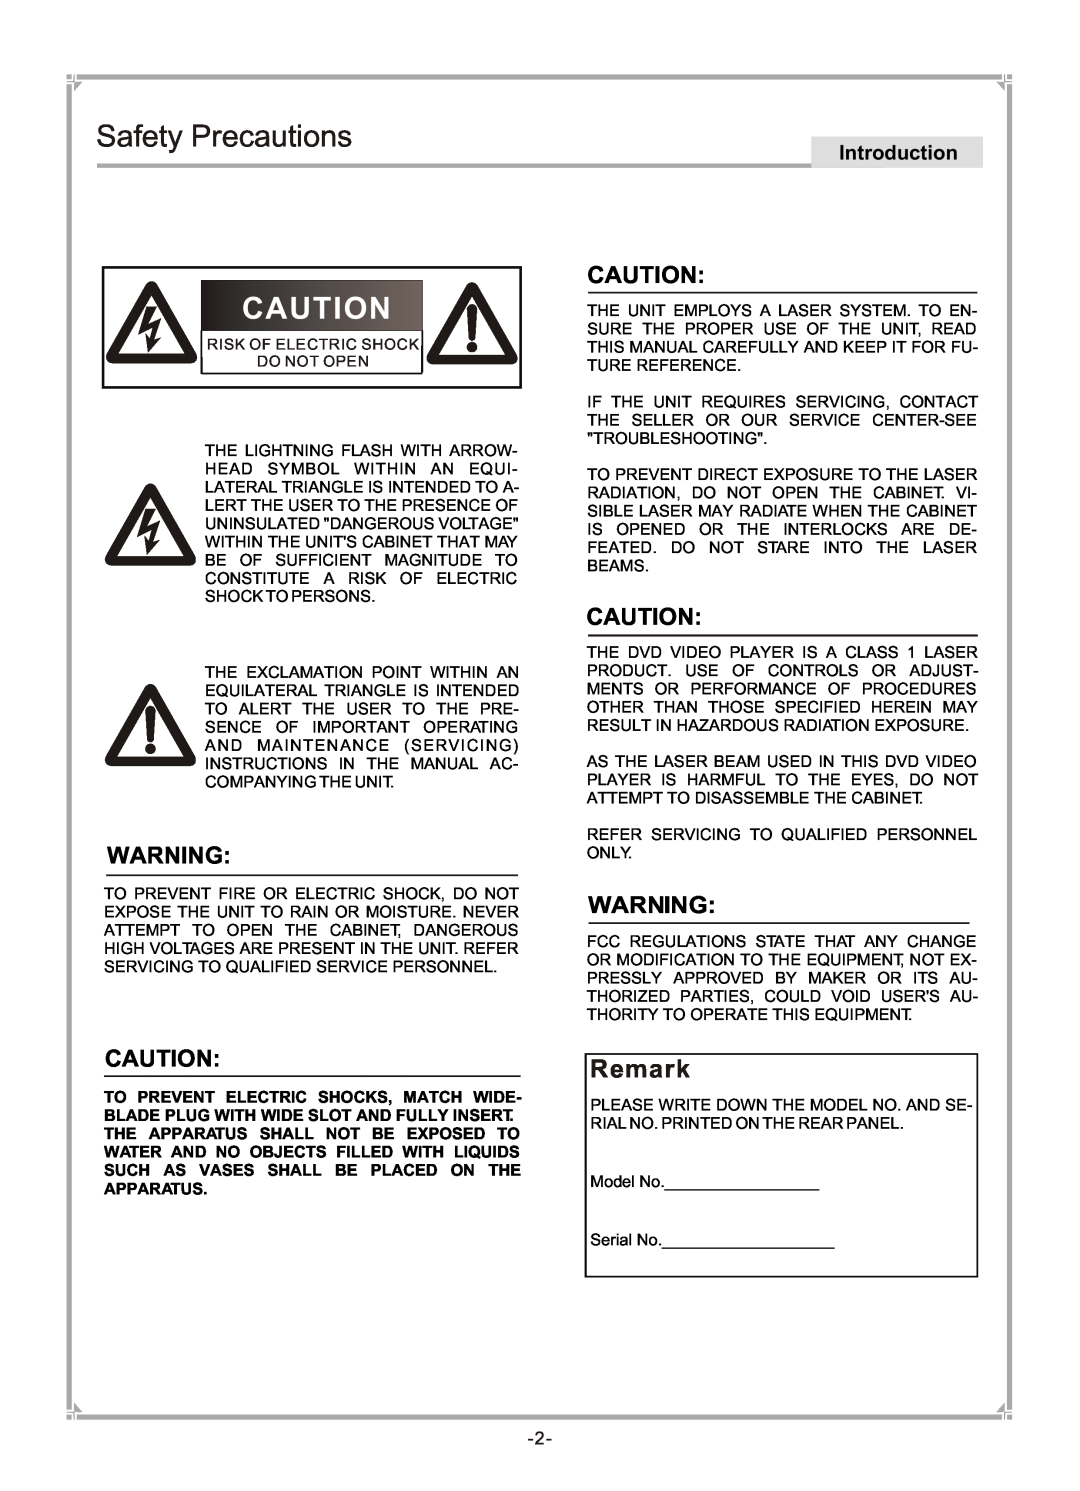 GoVideo DVP745 user manual Safety Precautions, Remark, Introduction 